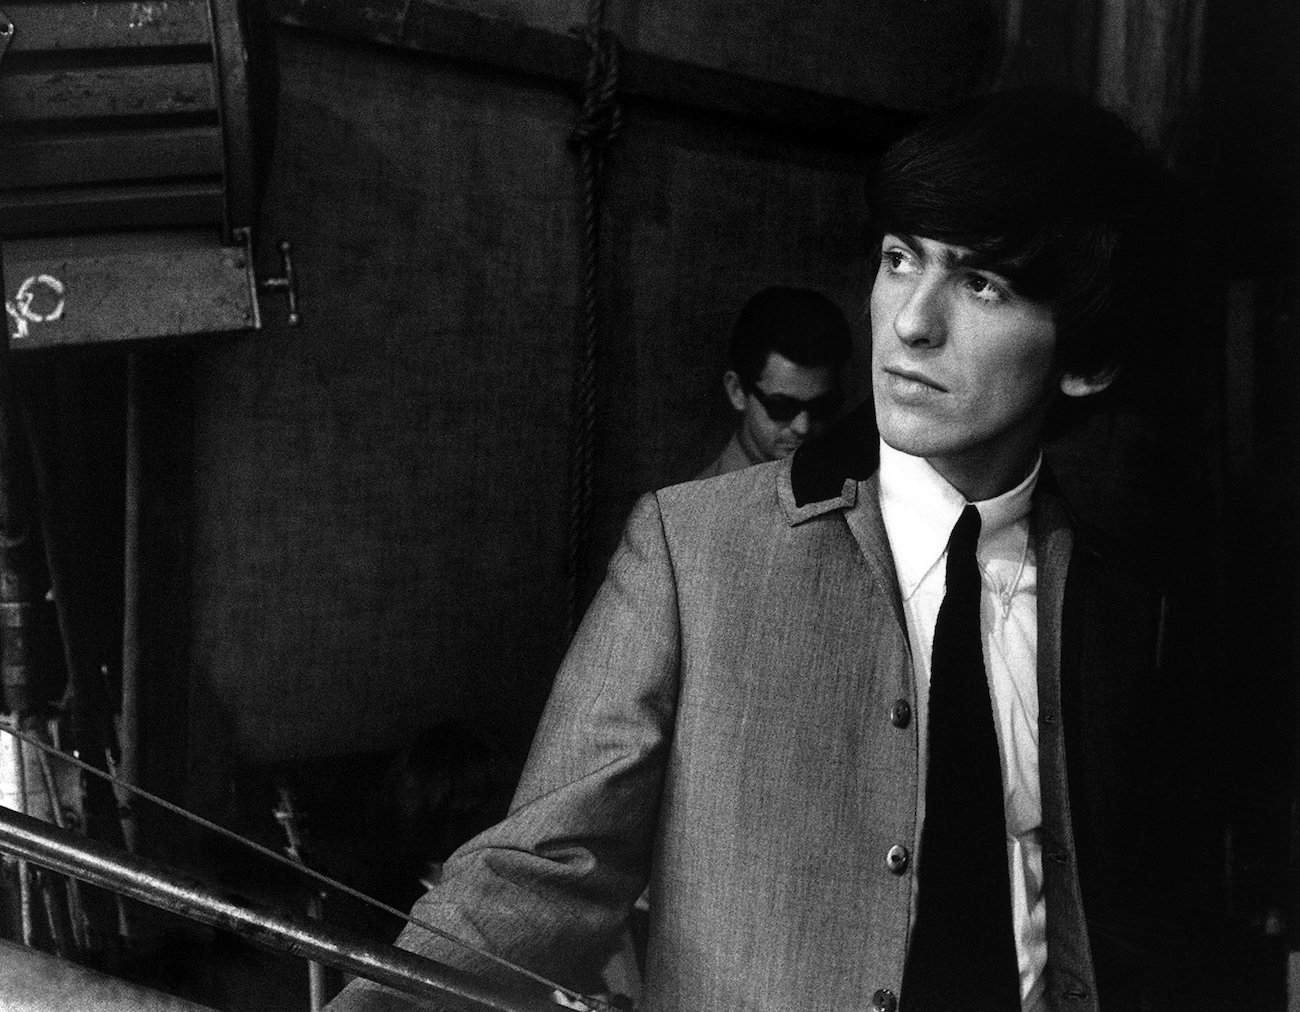 George Harrison in Liverpool for the Northern premiere of 'A Hard Day's Night' in 1964.